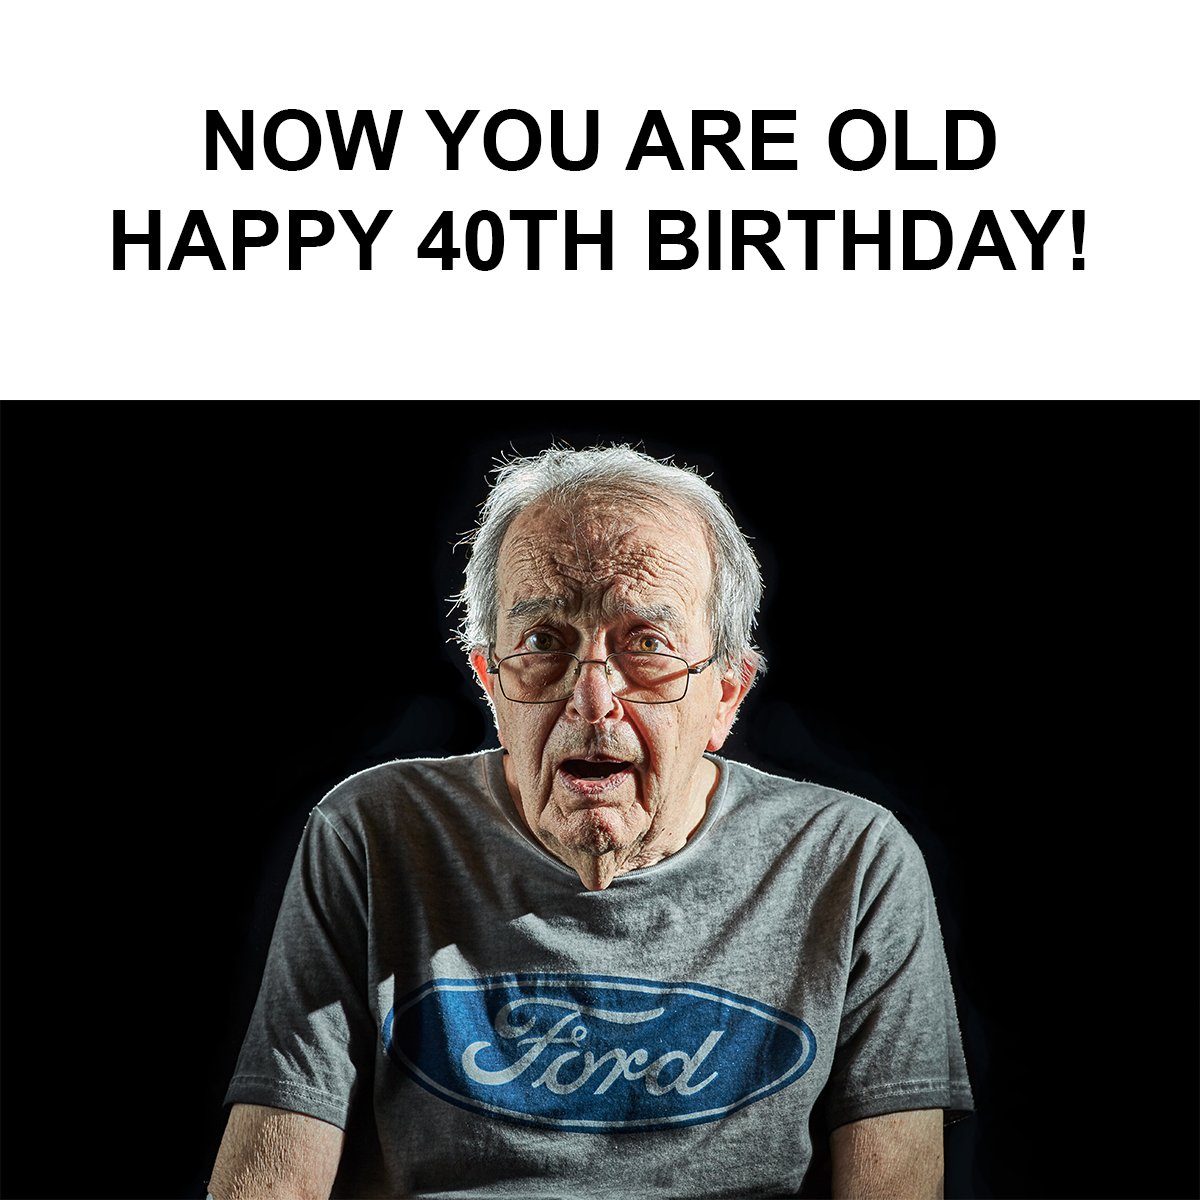 Happy Birthday Images Funny For Him